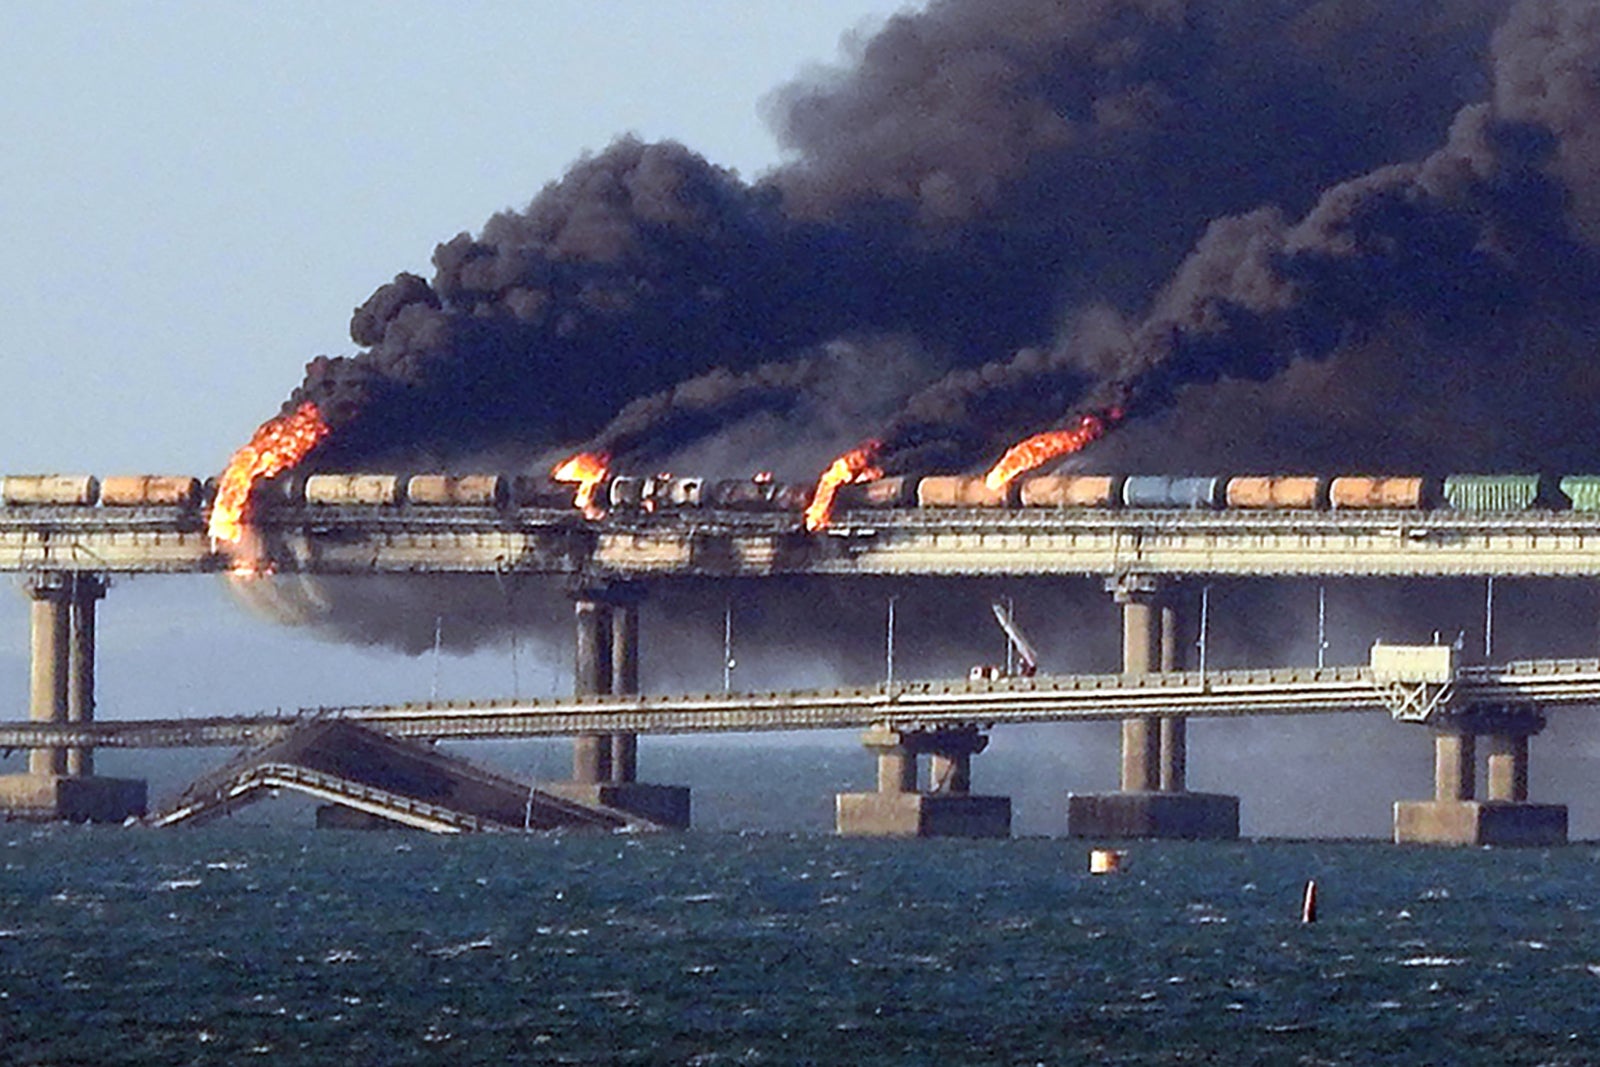 Thick smoke rising from parts of the Kerch Strait bridge on Saturday